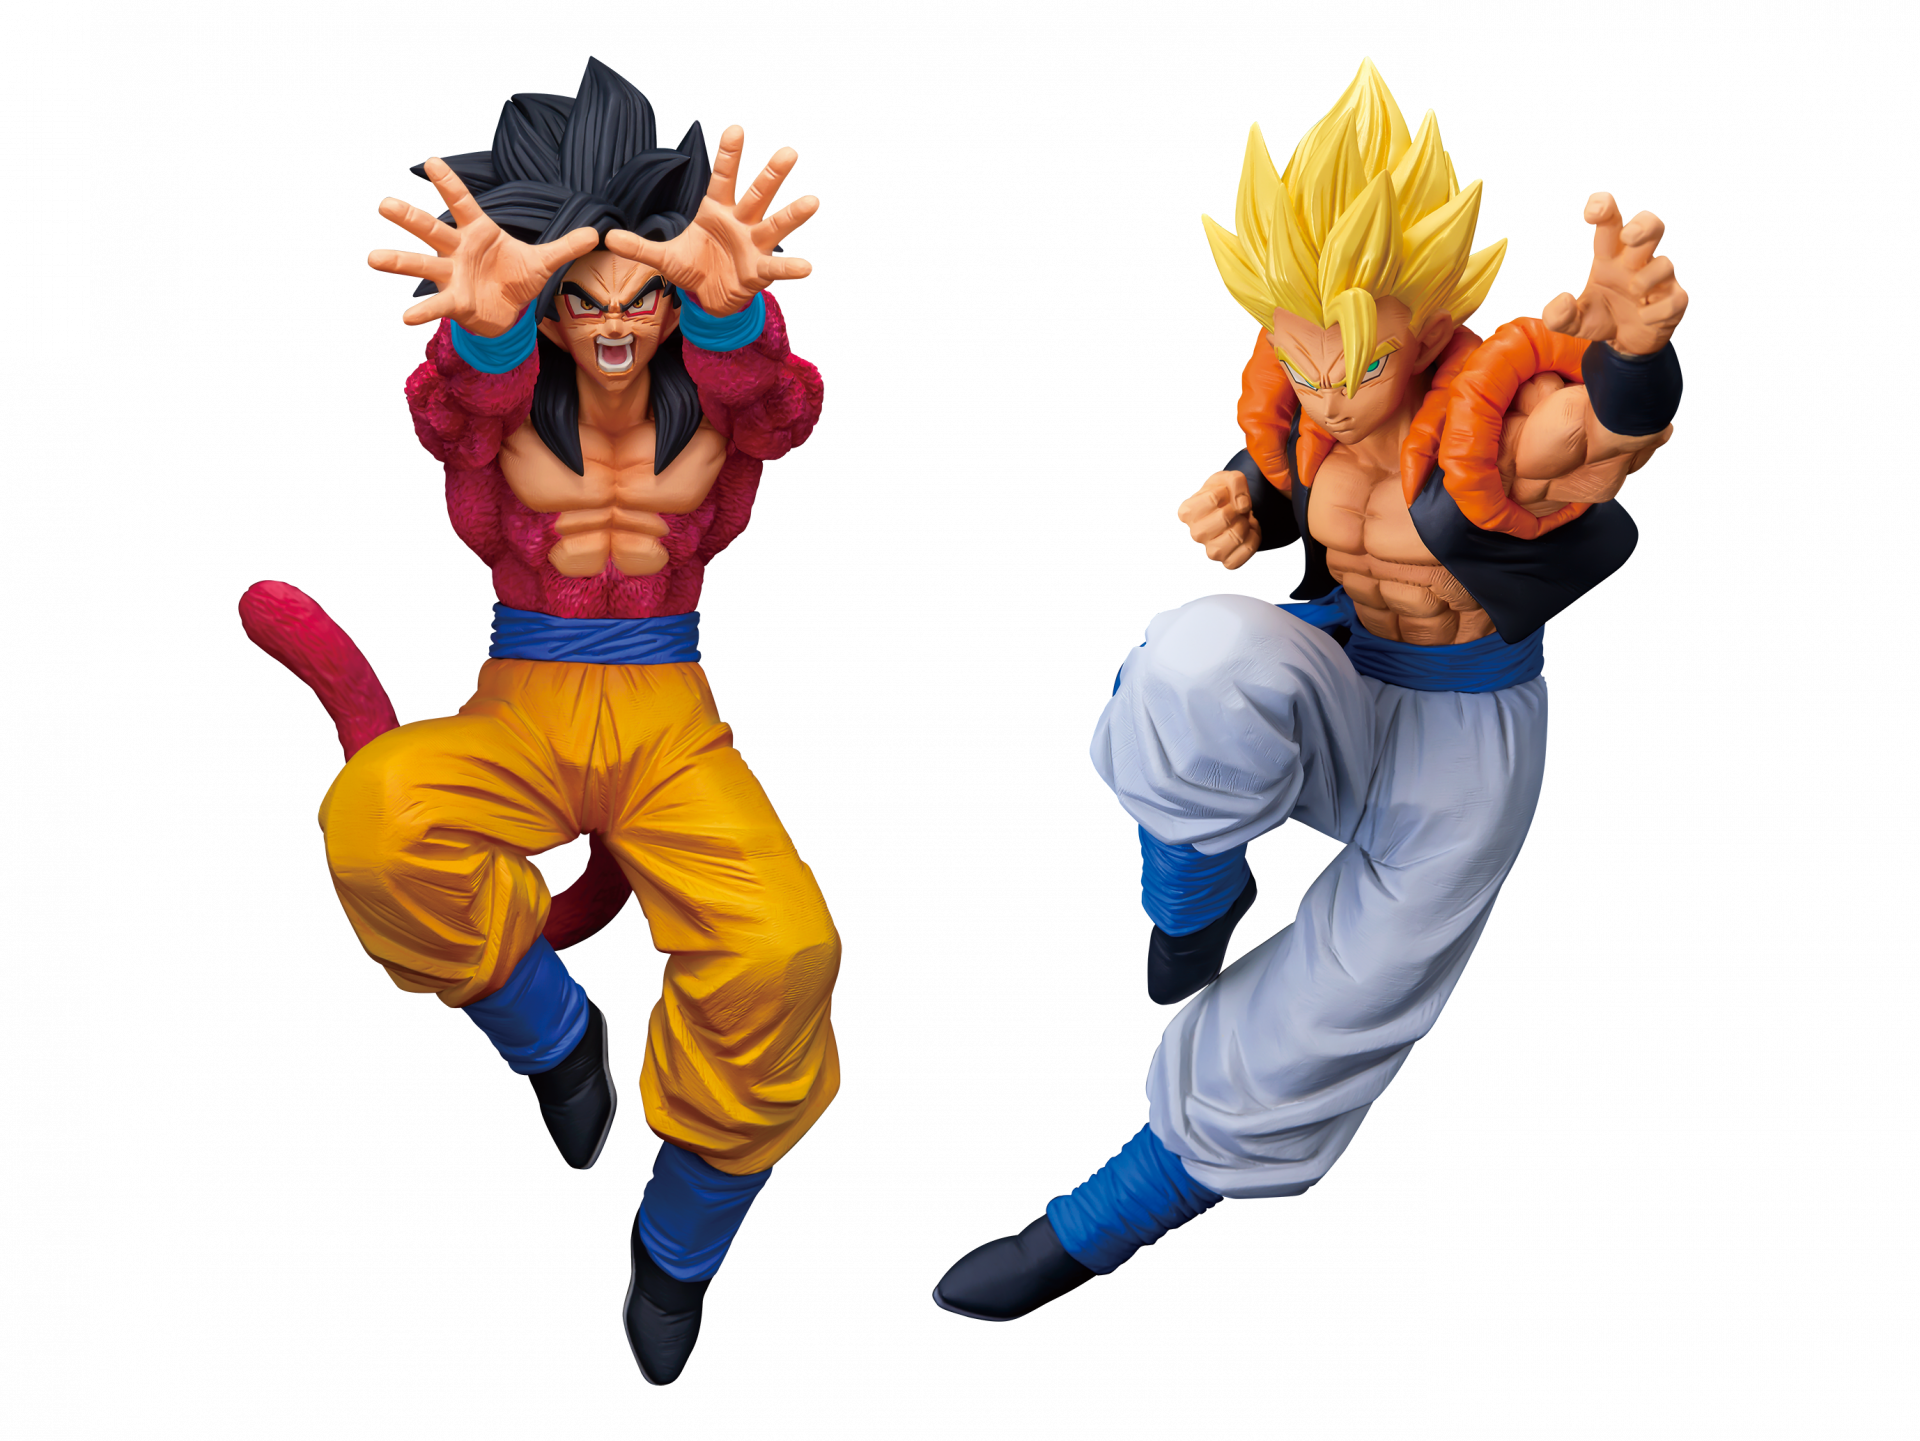 Goku FES!! New Figures Coming to Game Centers!